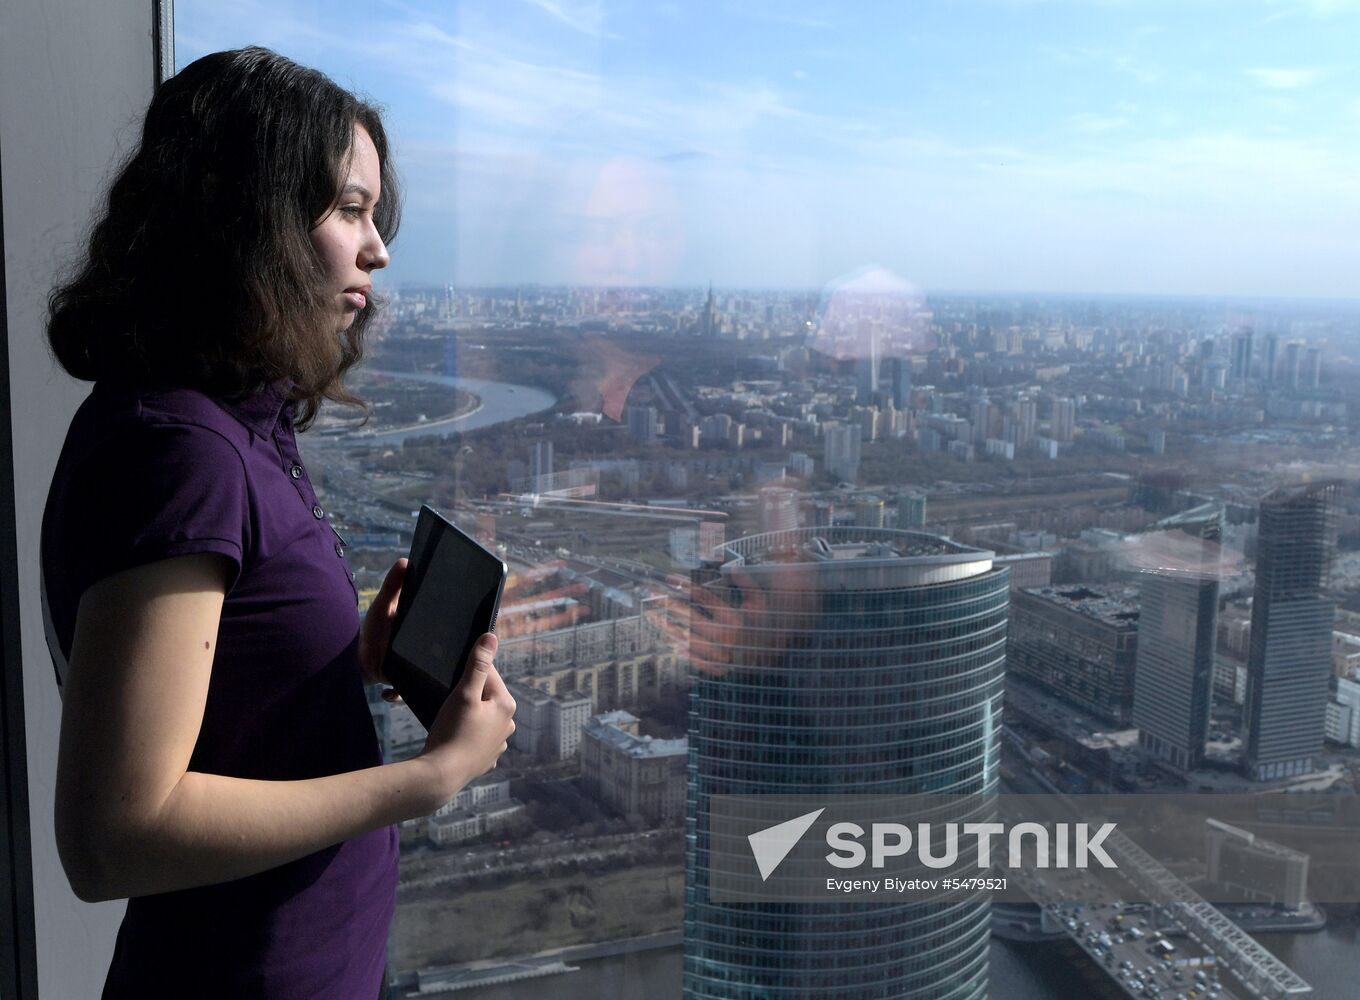 Europe's highest viewing platform opens in Moscow